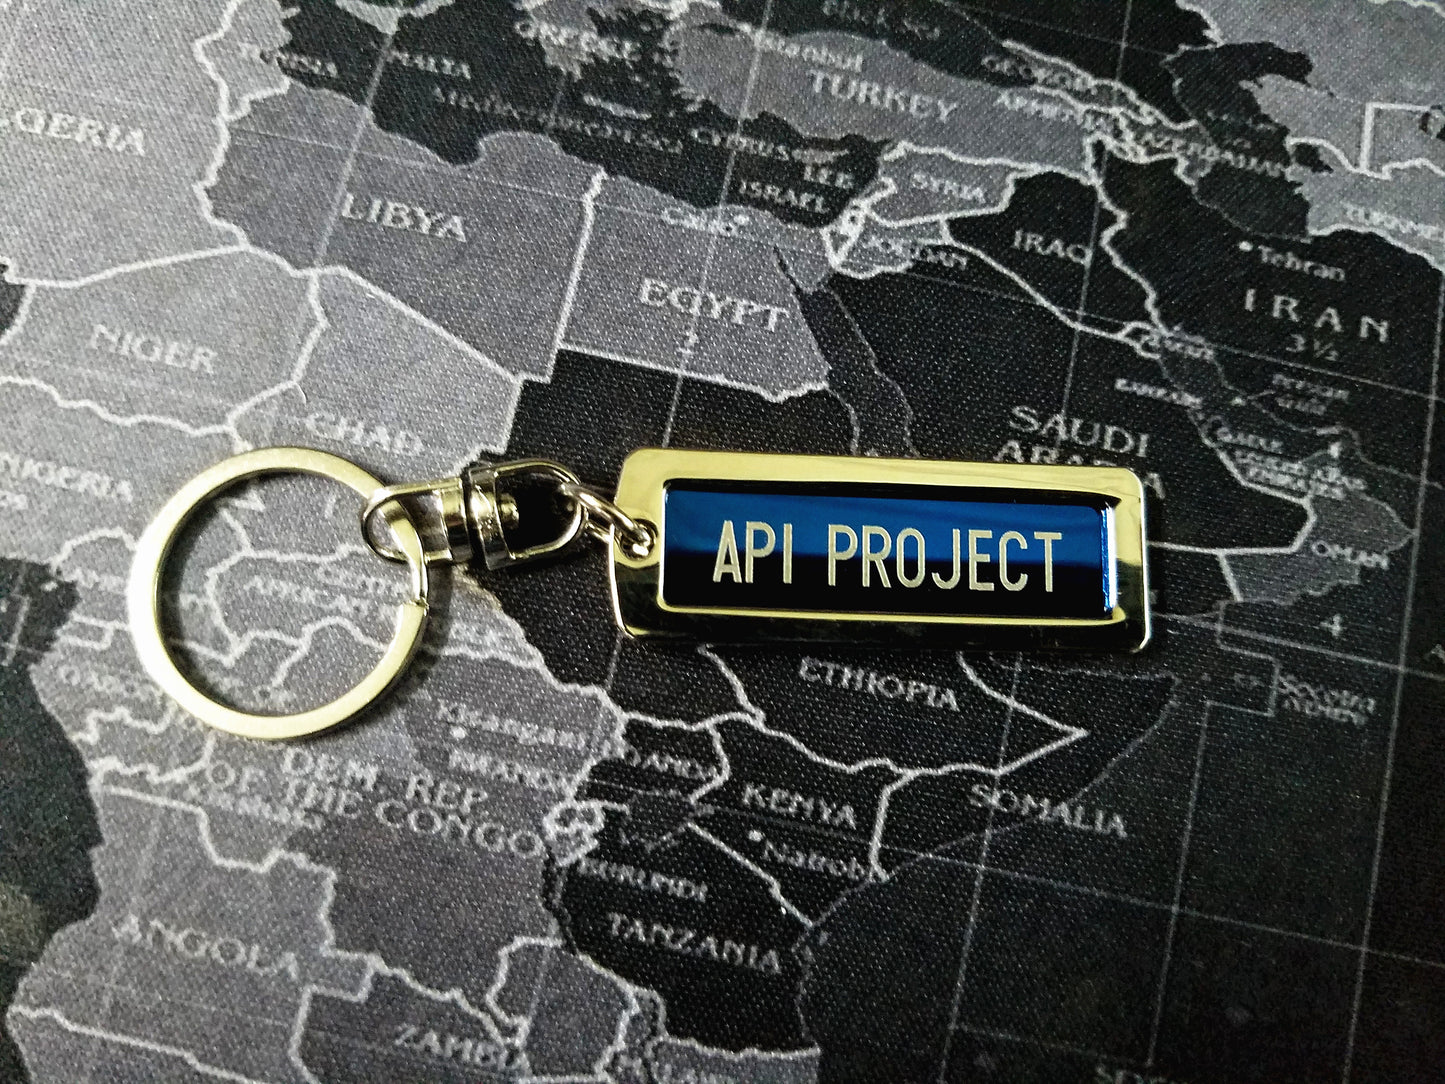 AP1 Project Keychain